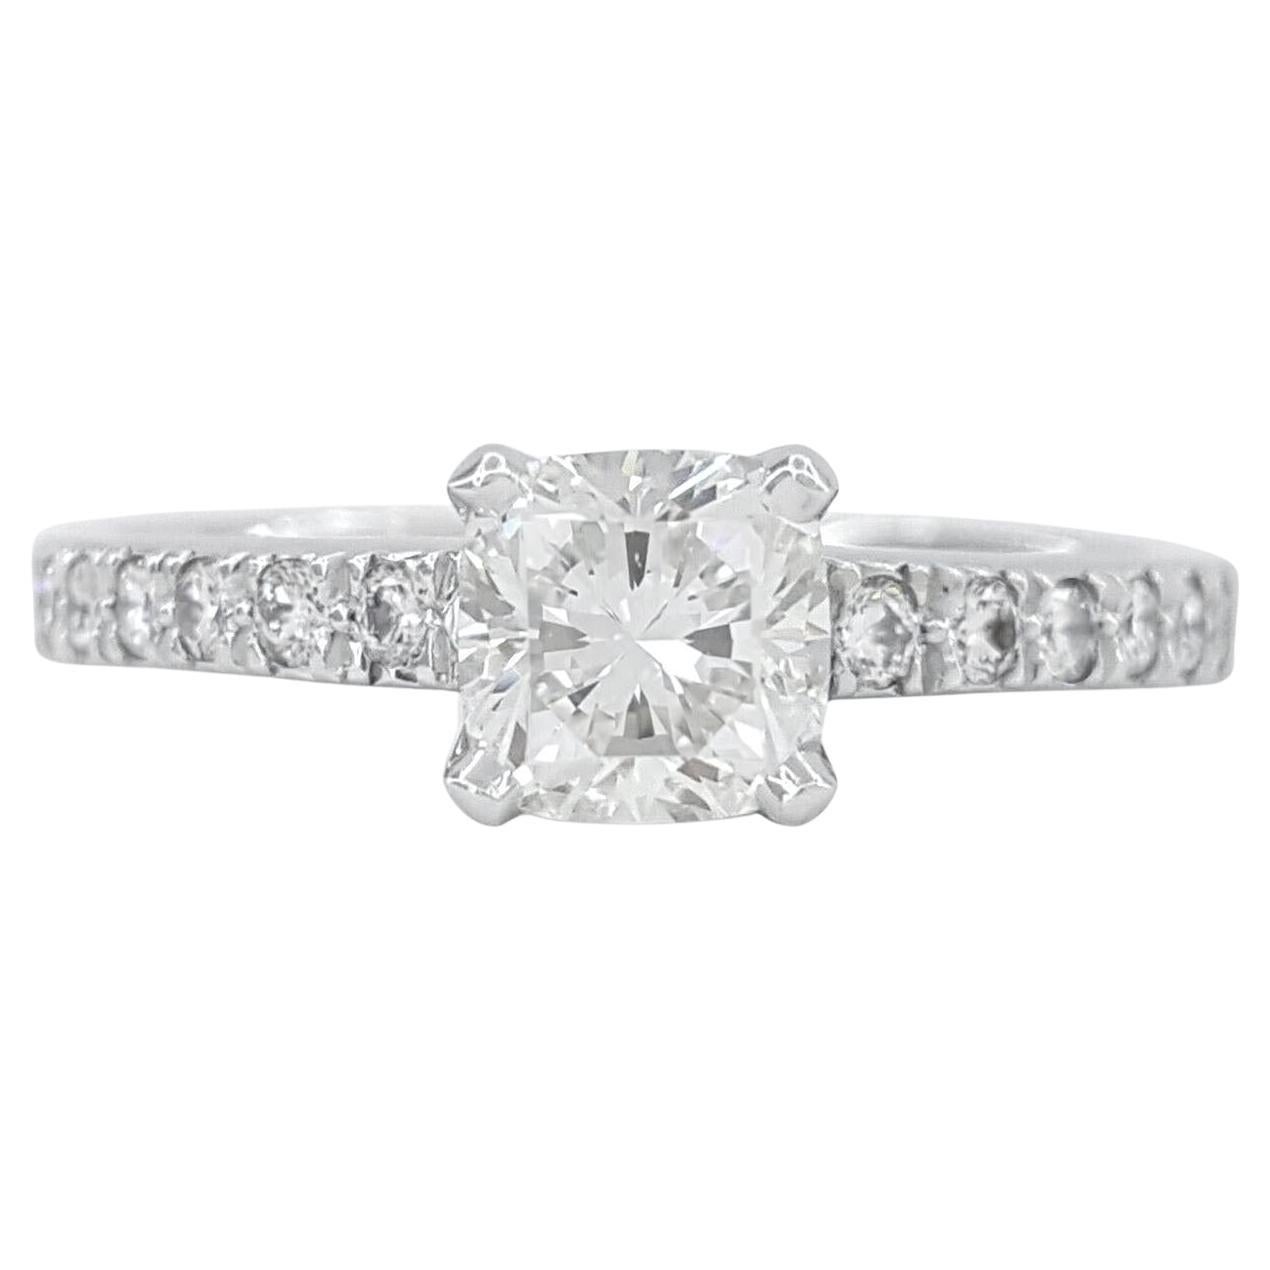 GIA Certified Internally Flawless Clarity D Color Cushion Cut Pave Ring